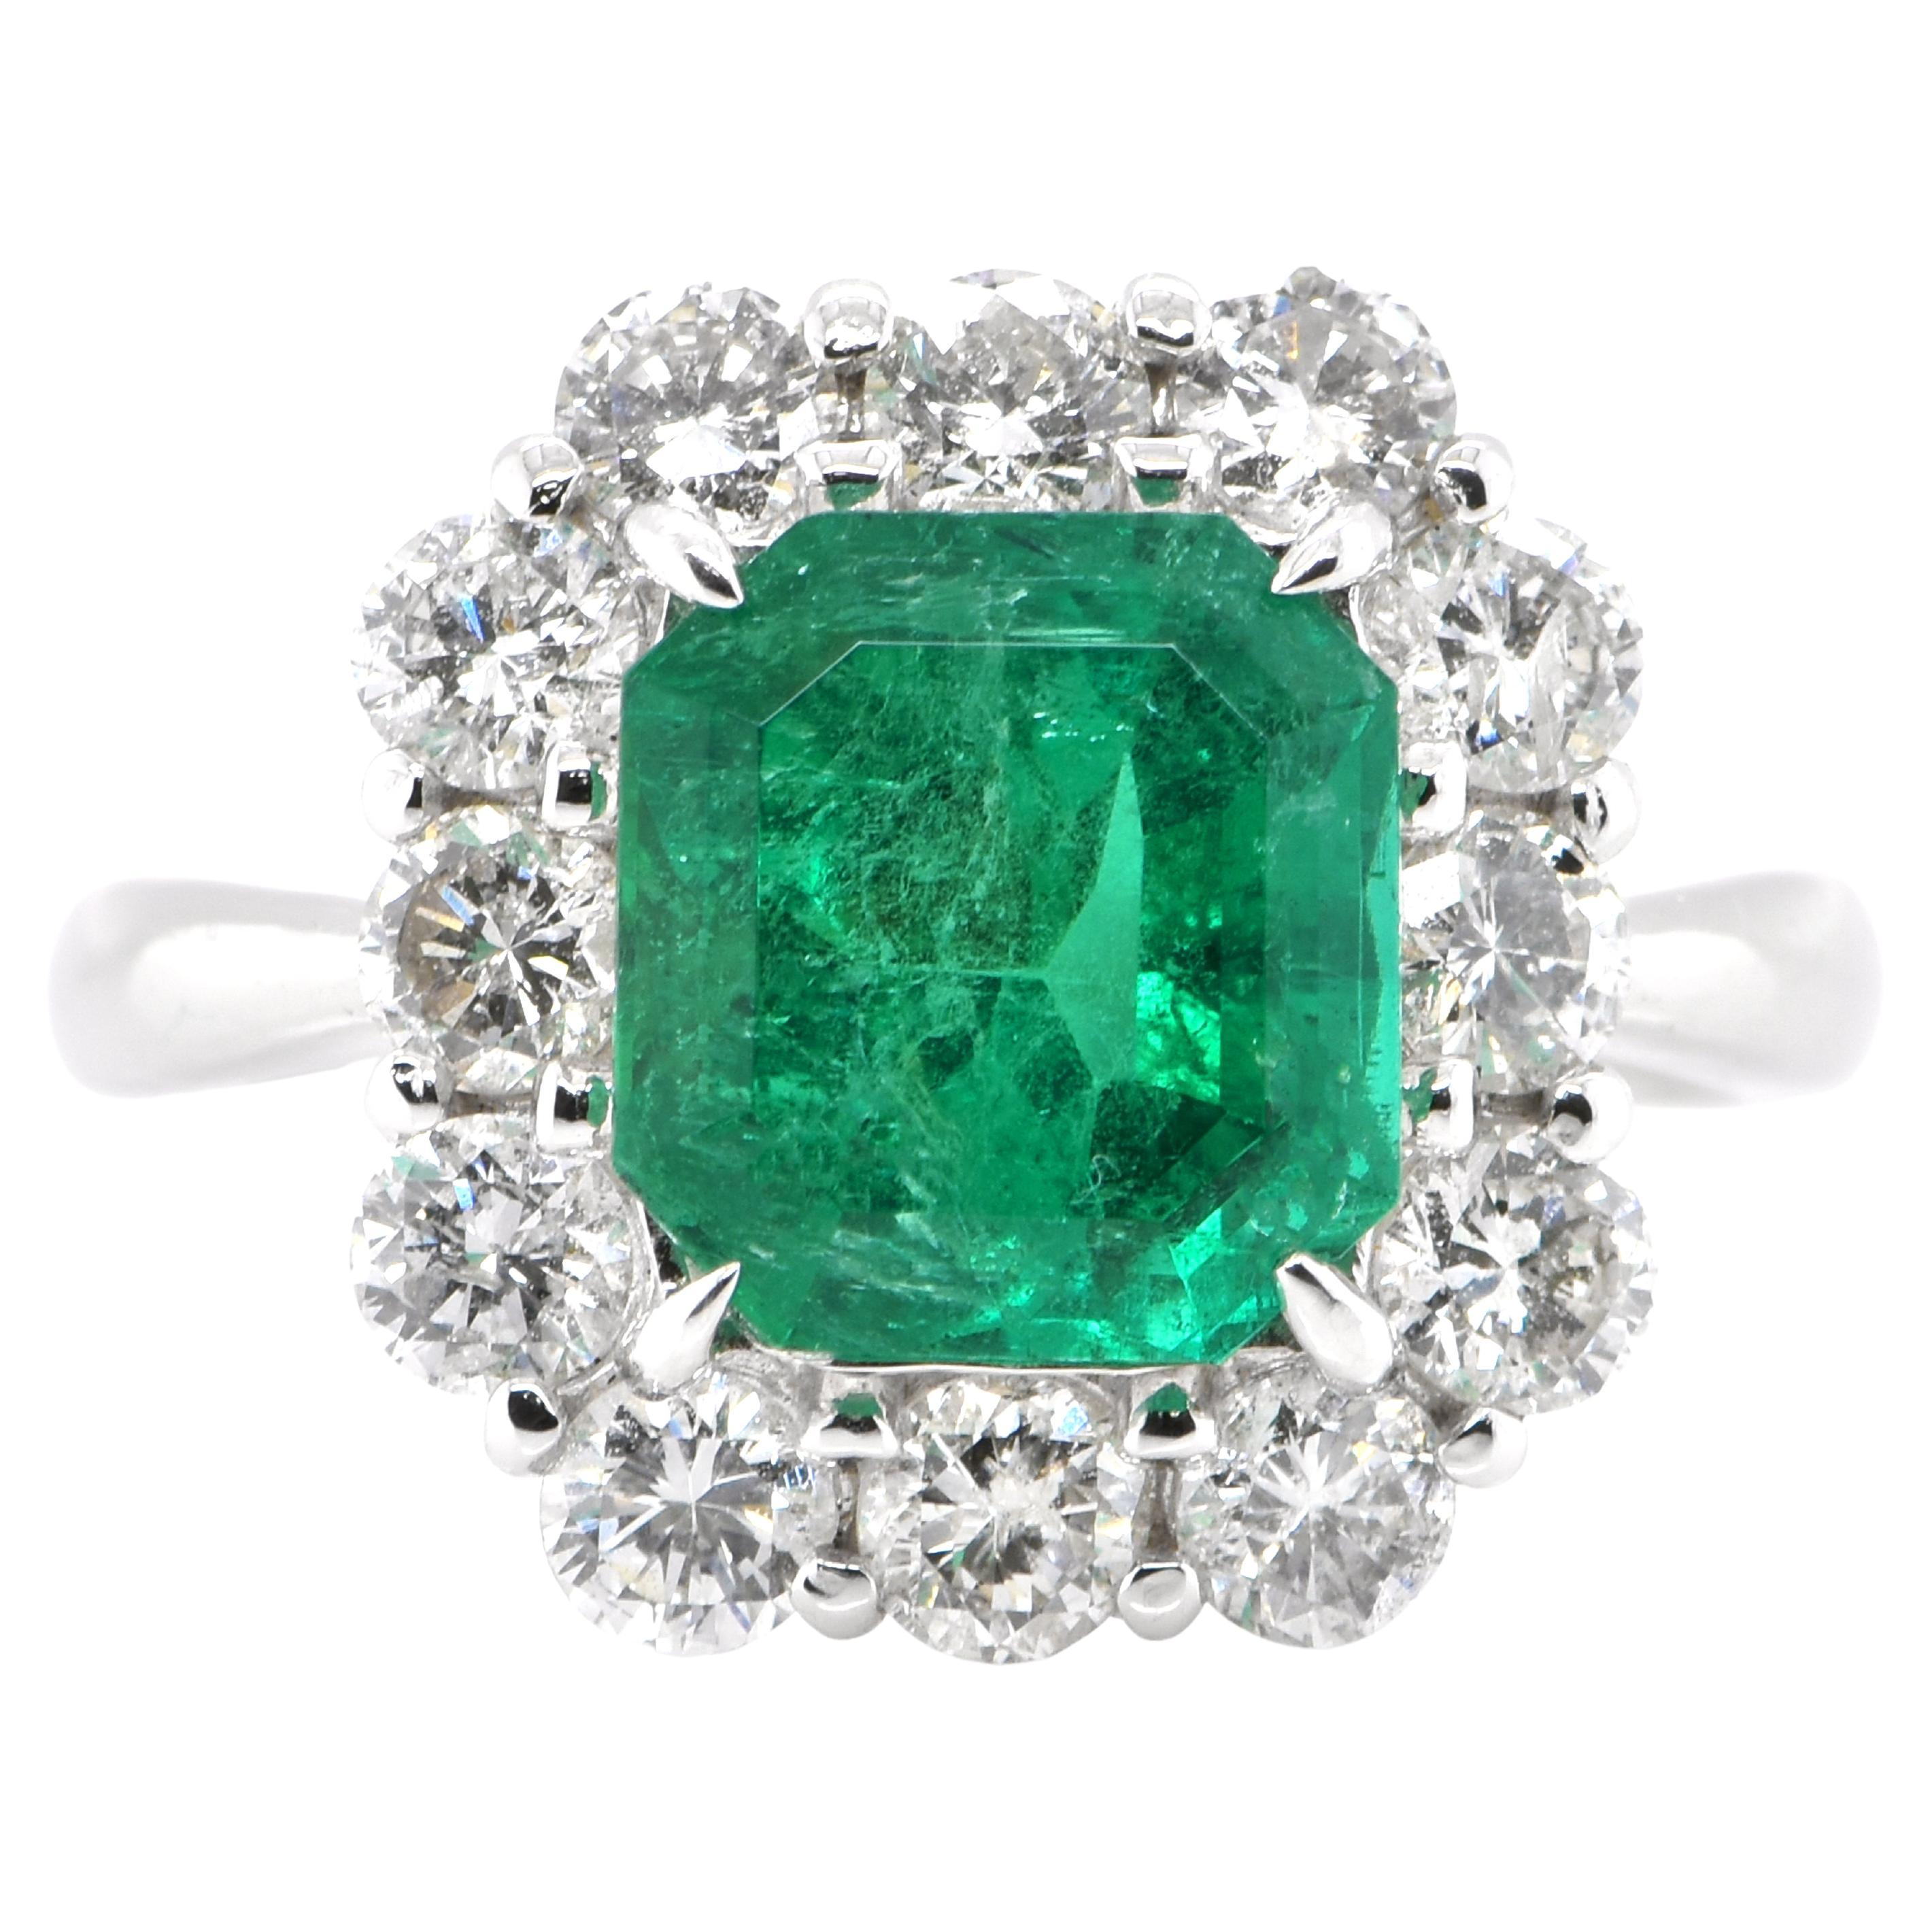 GIA Certified 2.73 Carat Natural Colombian Emerald Diamond Ring Set in Platinum